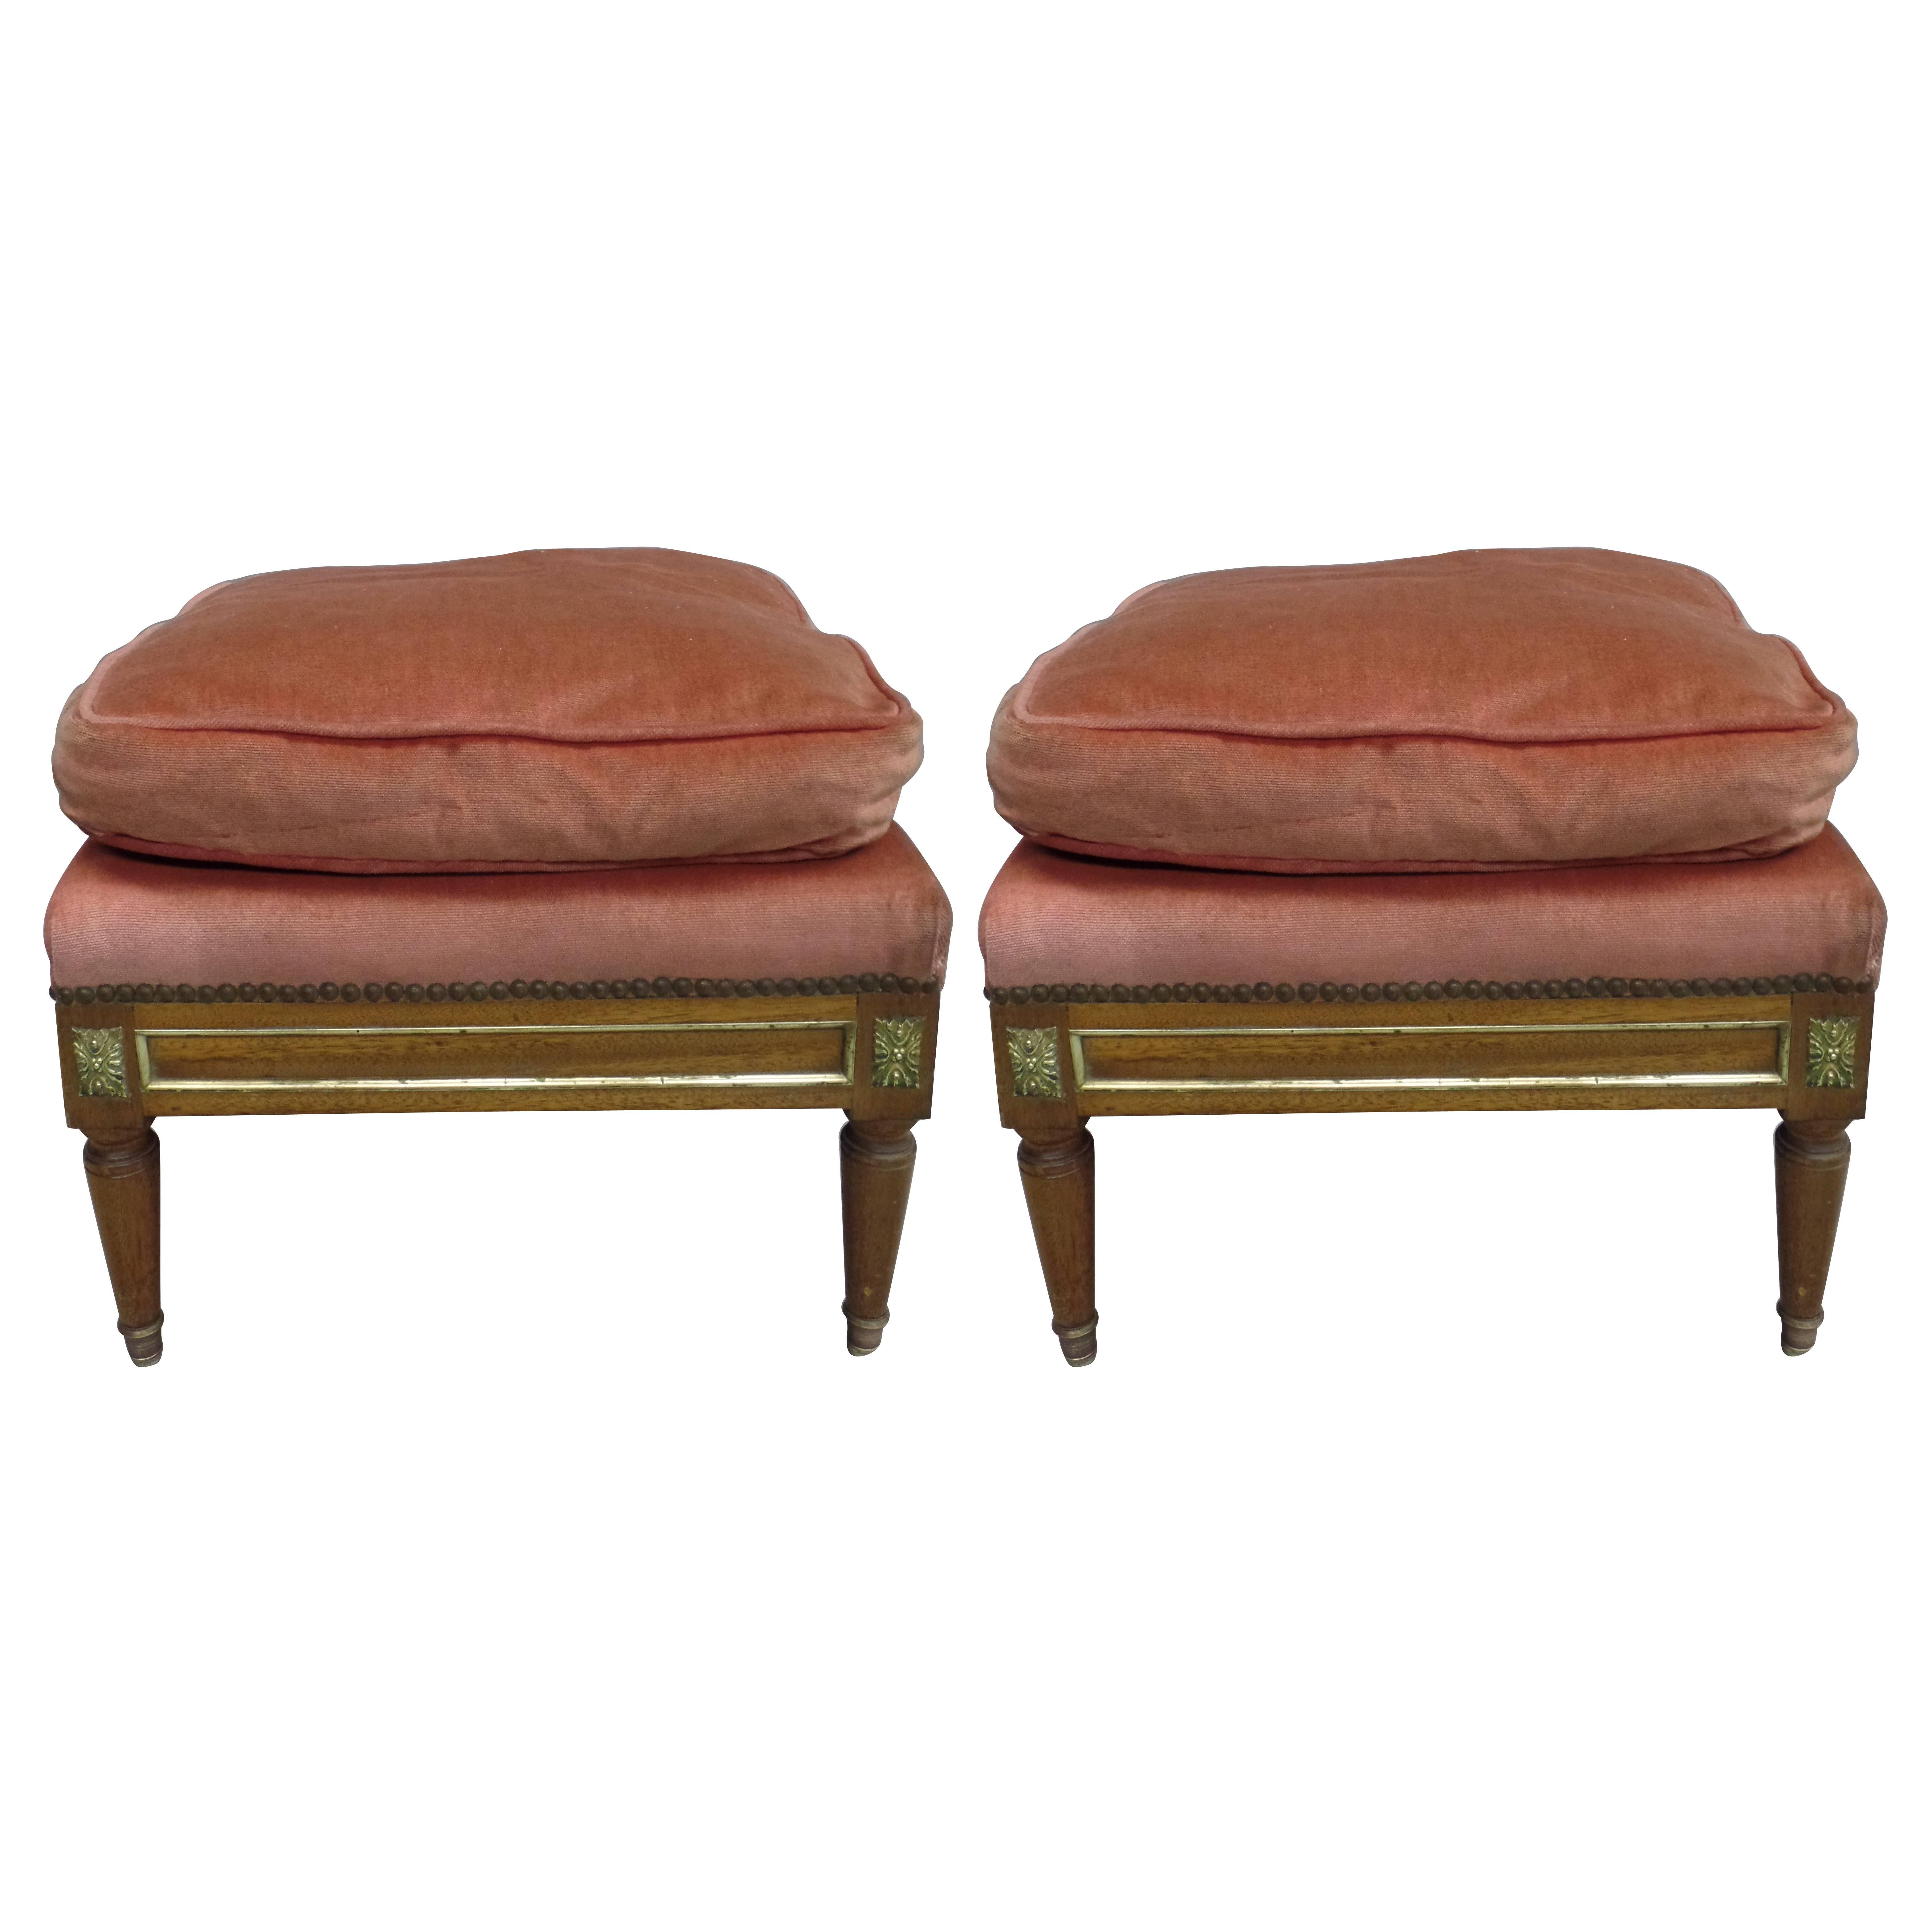 A pair of elegant Mid-Century Louis XVI style foot stools / ottomans / poofs in the modern neoclassical tradition with tapered legs ending in solid bronze sabots and brass decoration. Made by hand.